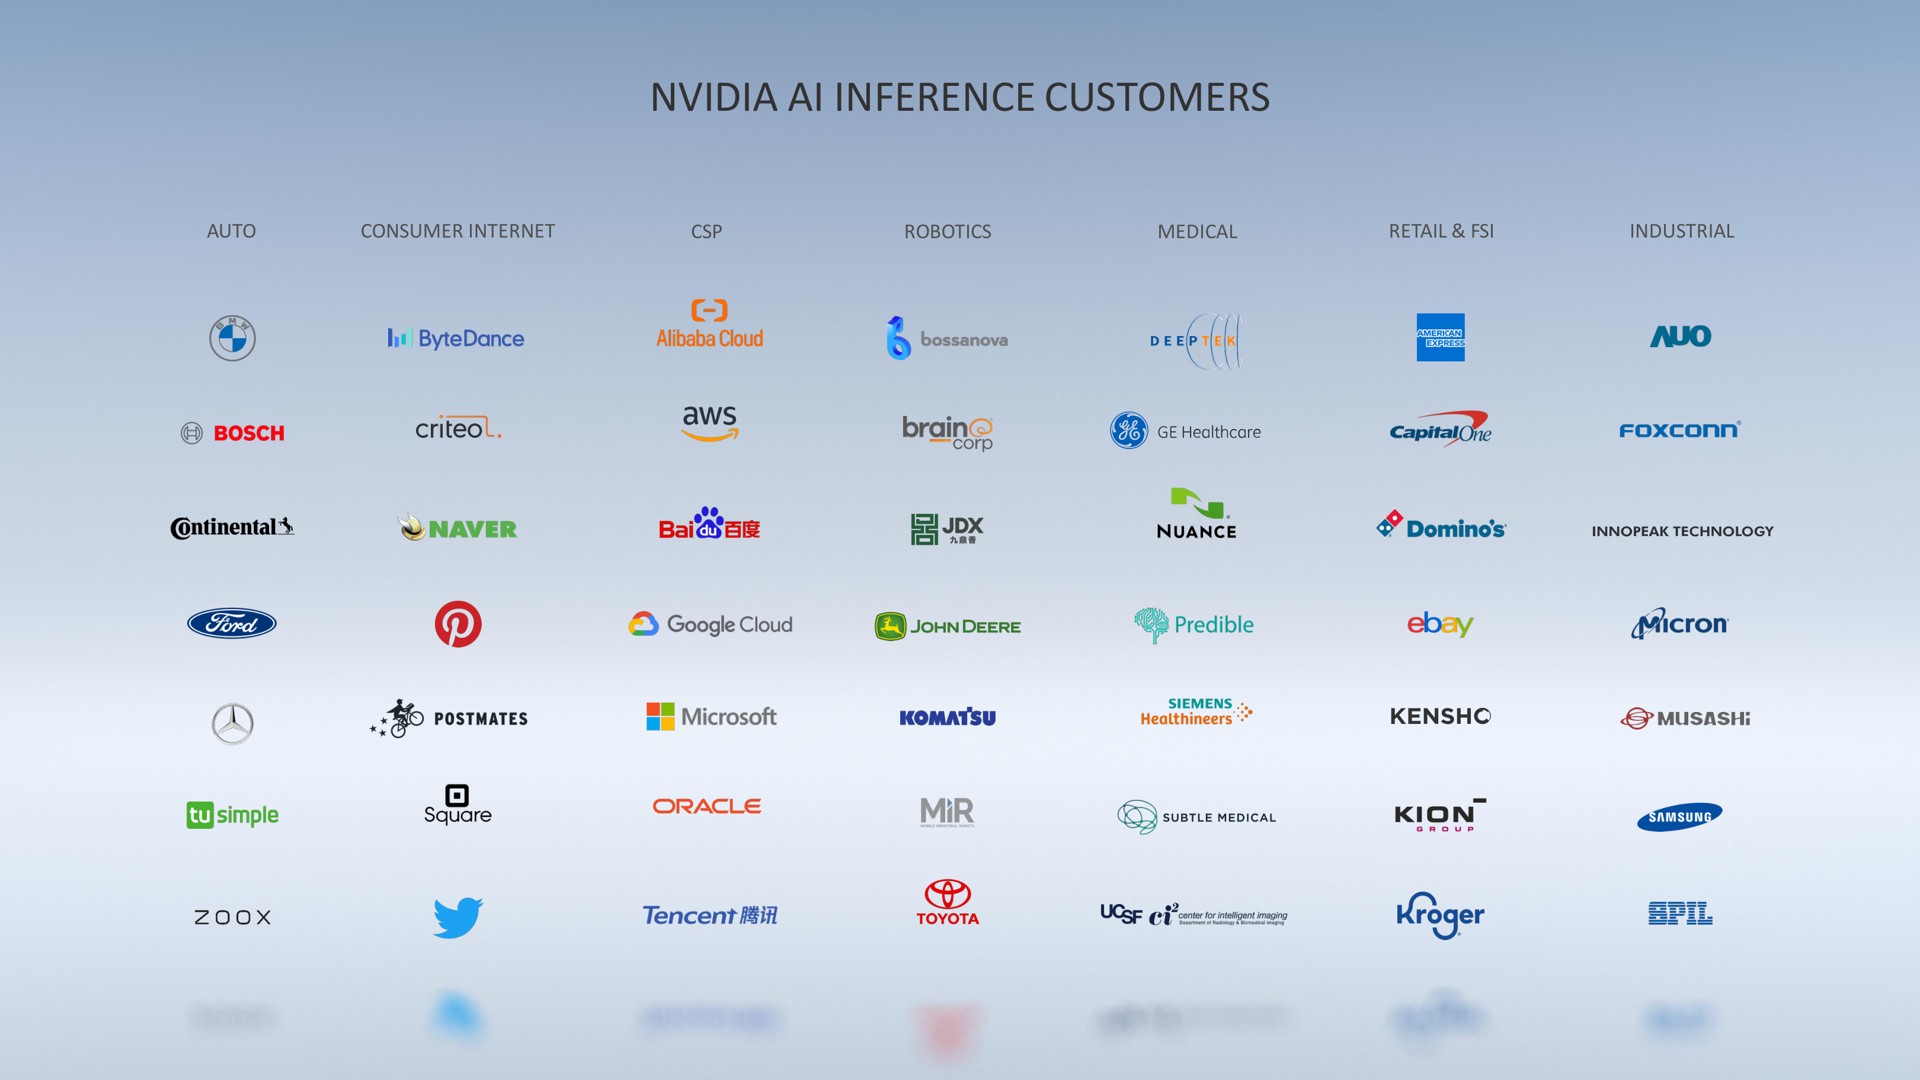 inference customers mir | NVIDIA